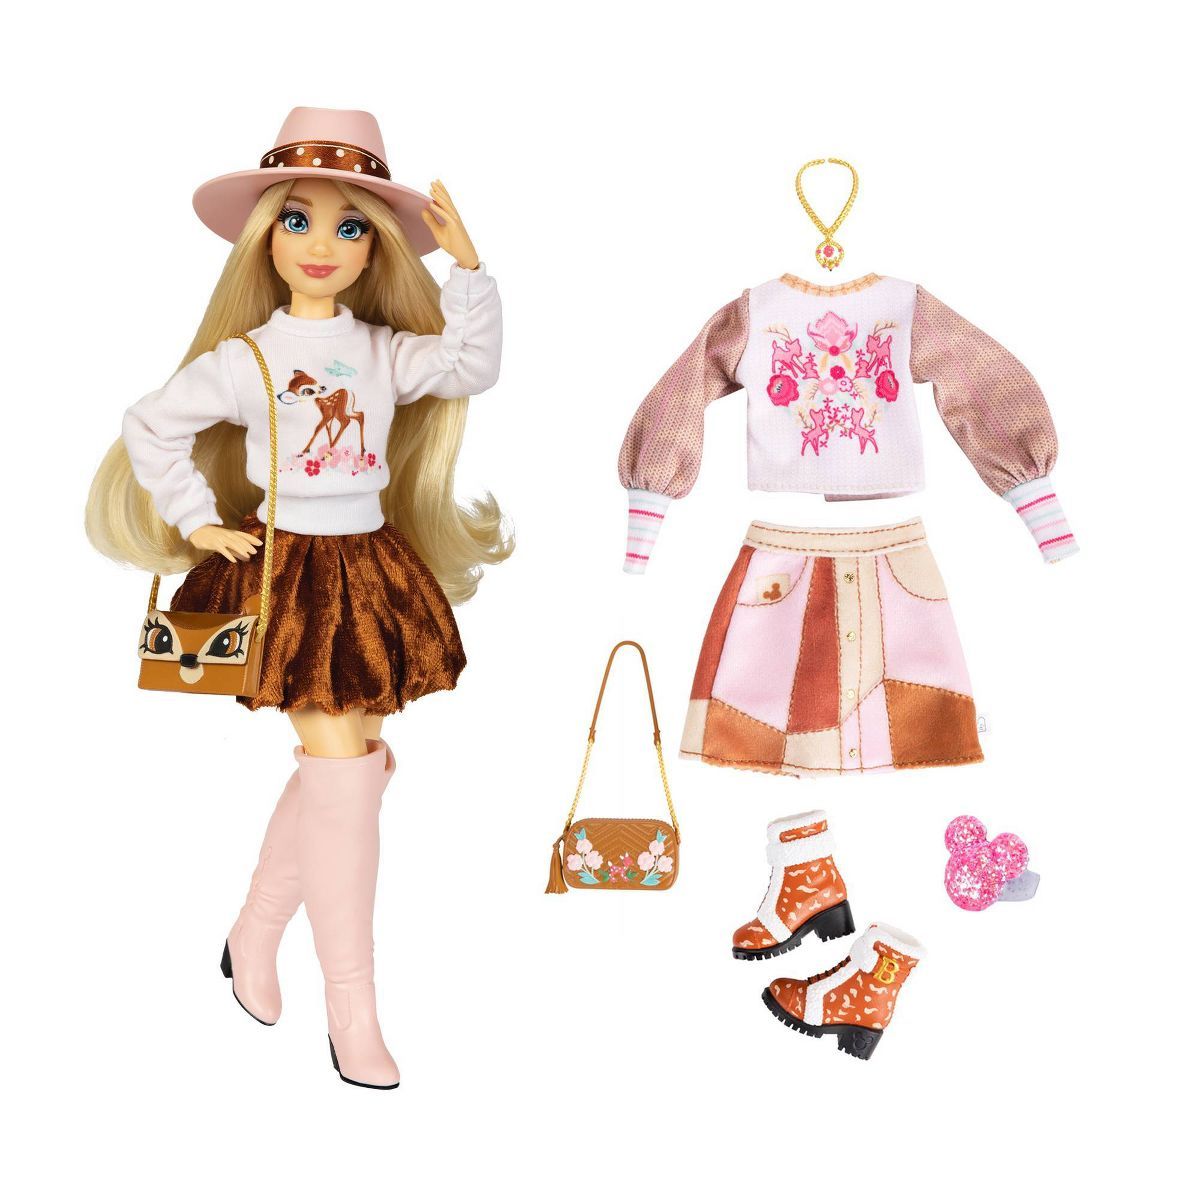 Disney ILY 4ever Fashion Doll - Inspired by Bambi | Target